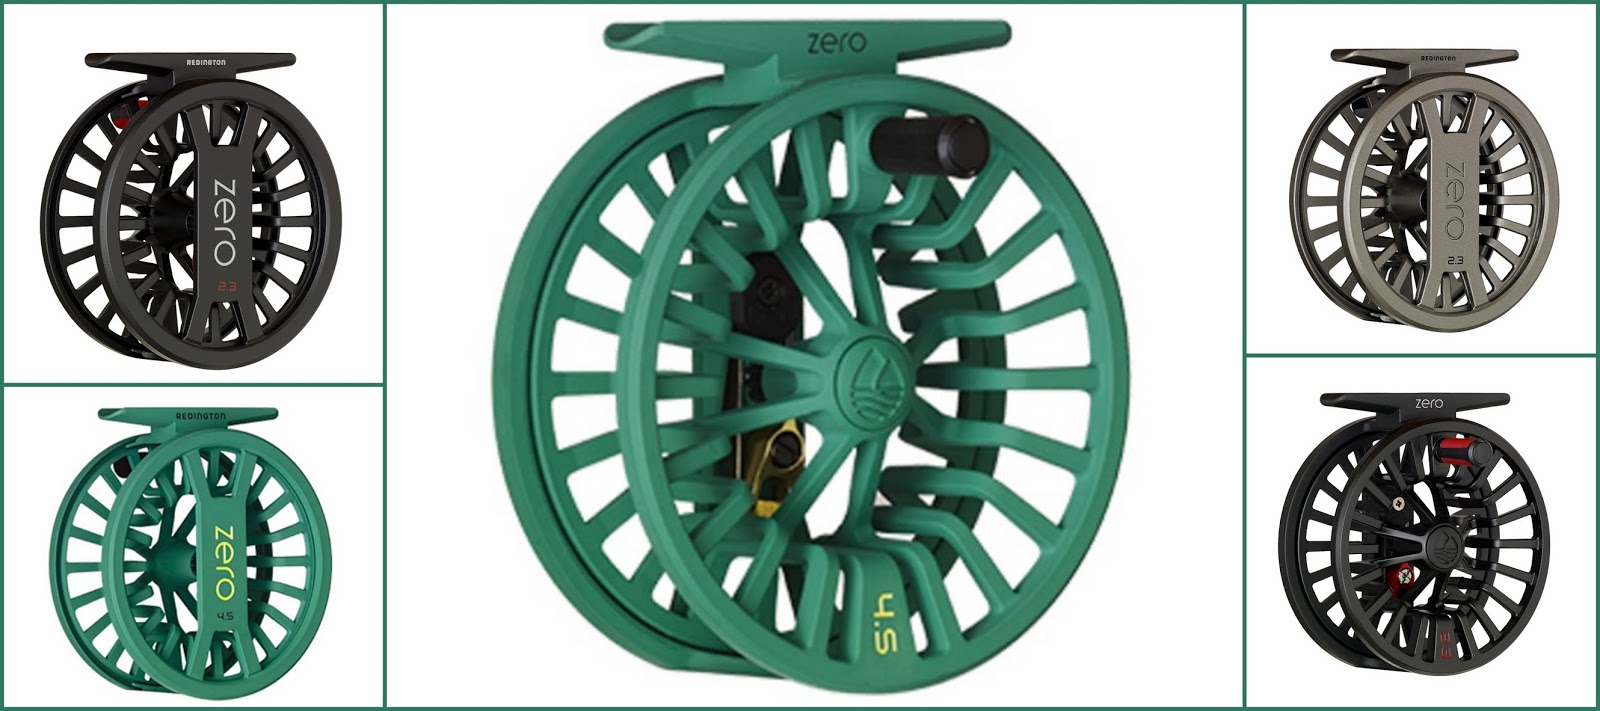 Gorge Fly Shop Blog: Redington Zero Fly Reels - New color for 2018